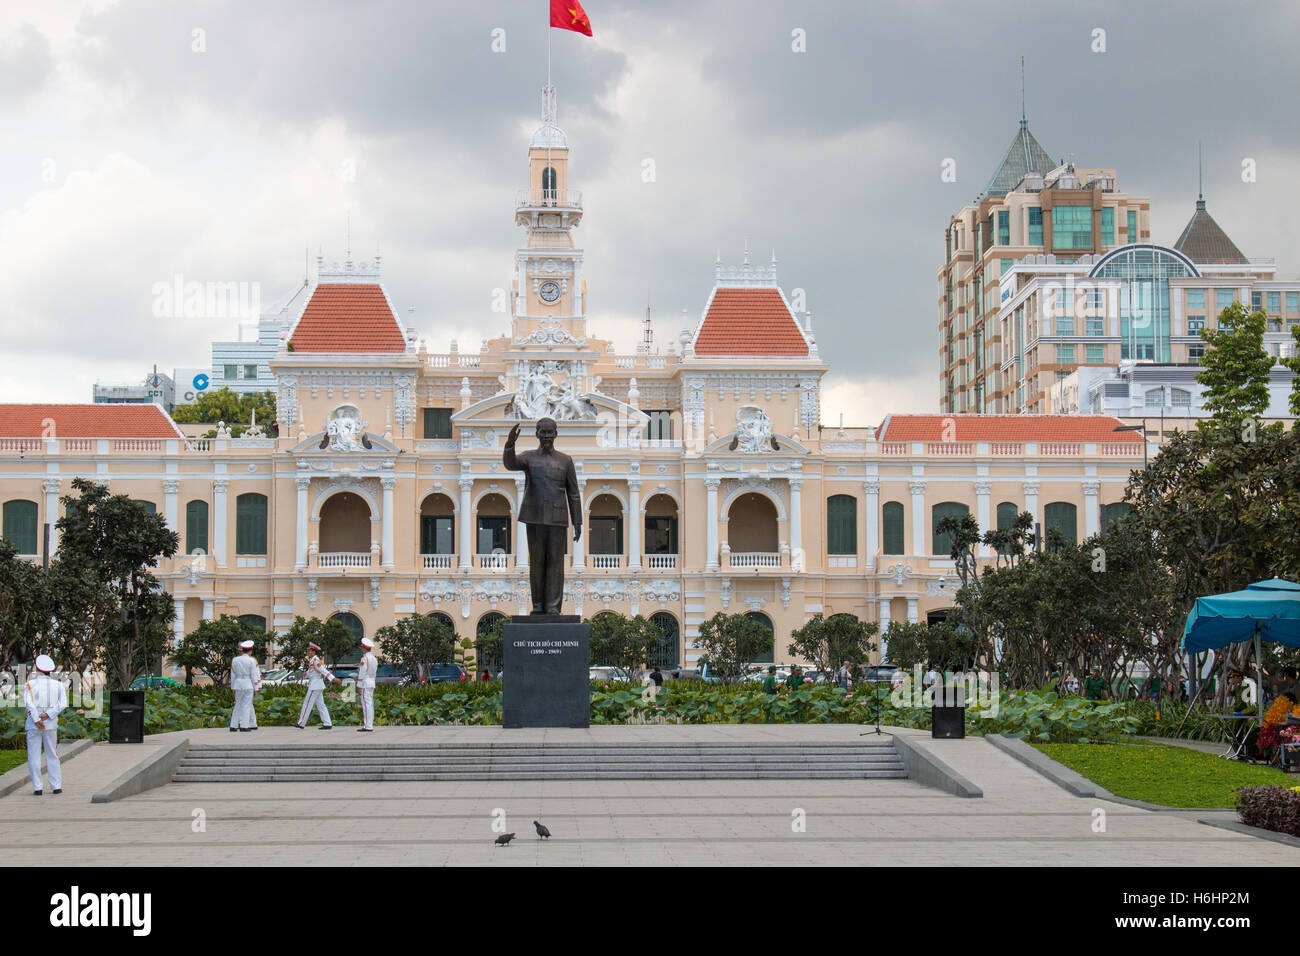 Hotel De Ville People's Committee Building, Ho Chi Minh City, Saigon Vietnam with leaders statue Stock Photo